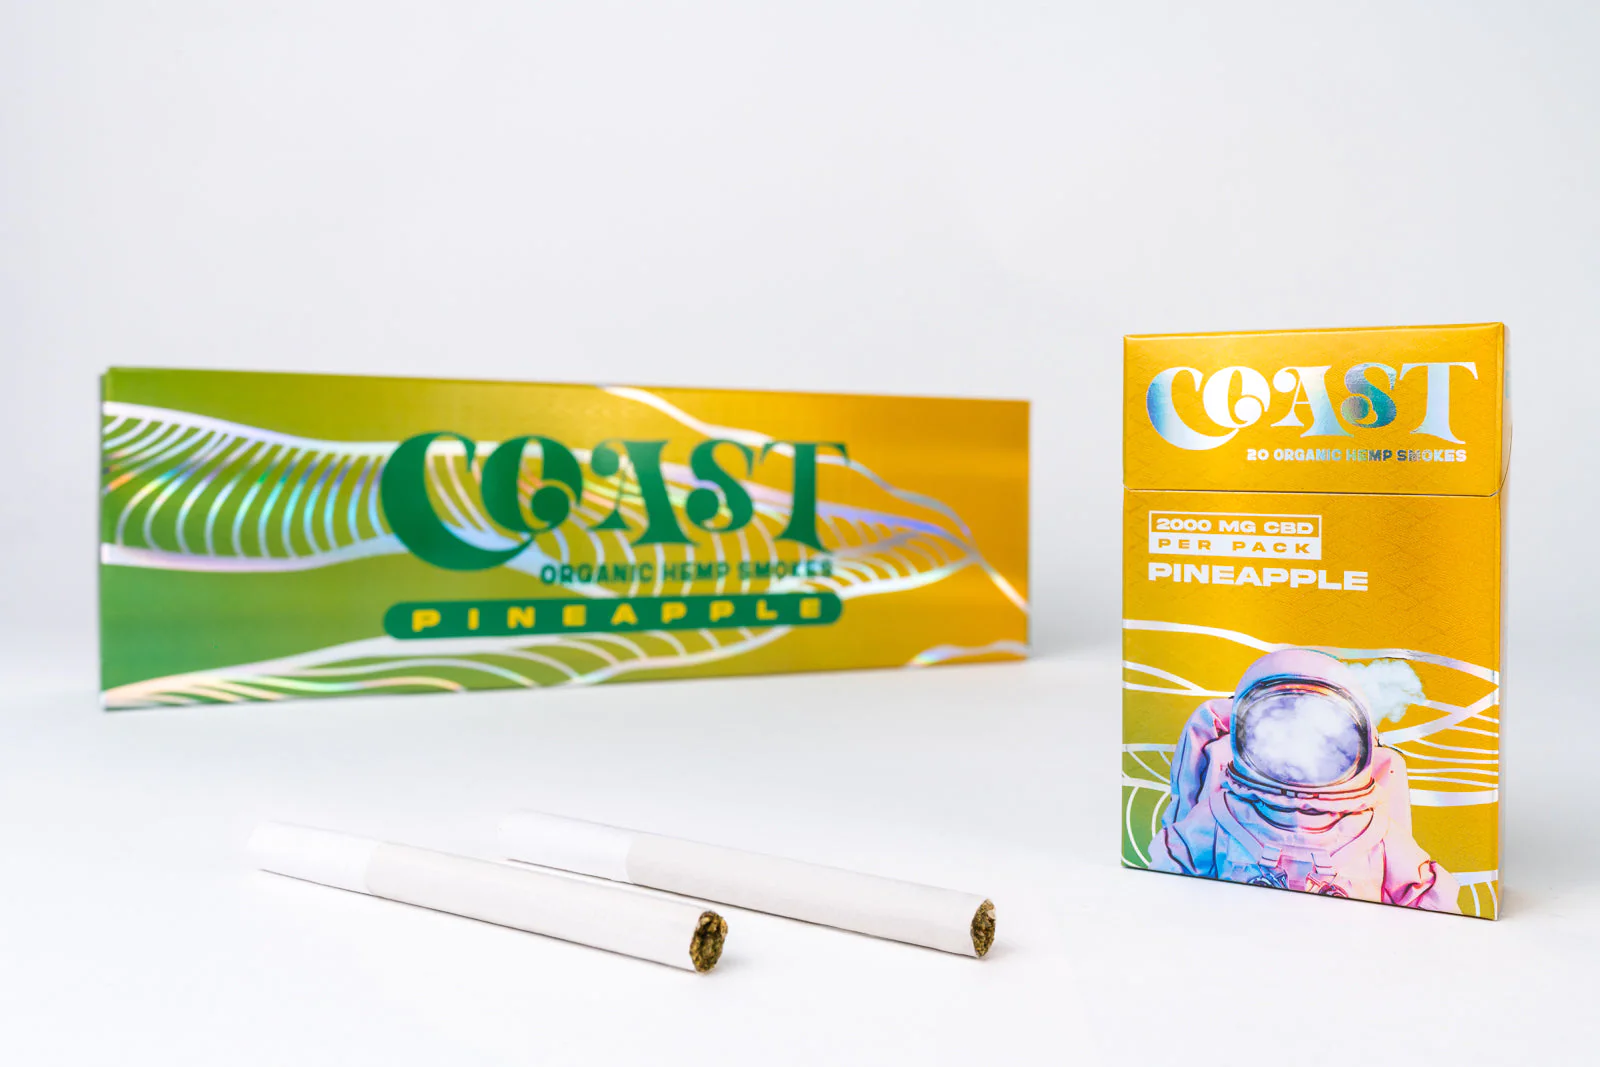 CBD Cigarettes ByCoastsmokes-In Depth Analysis of Top CBD Cigarettes A Comprehensive Review